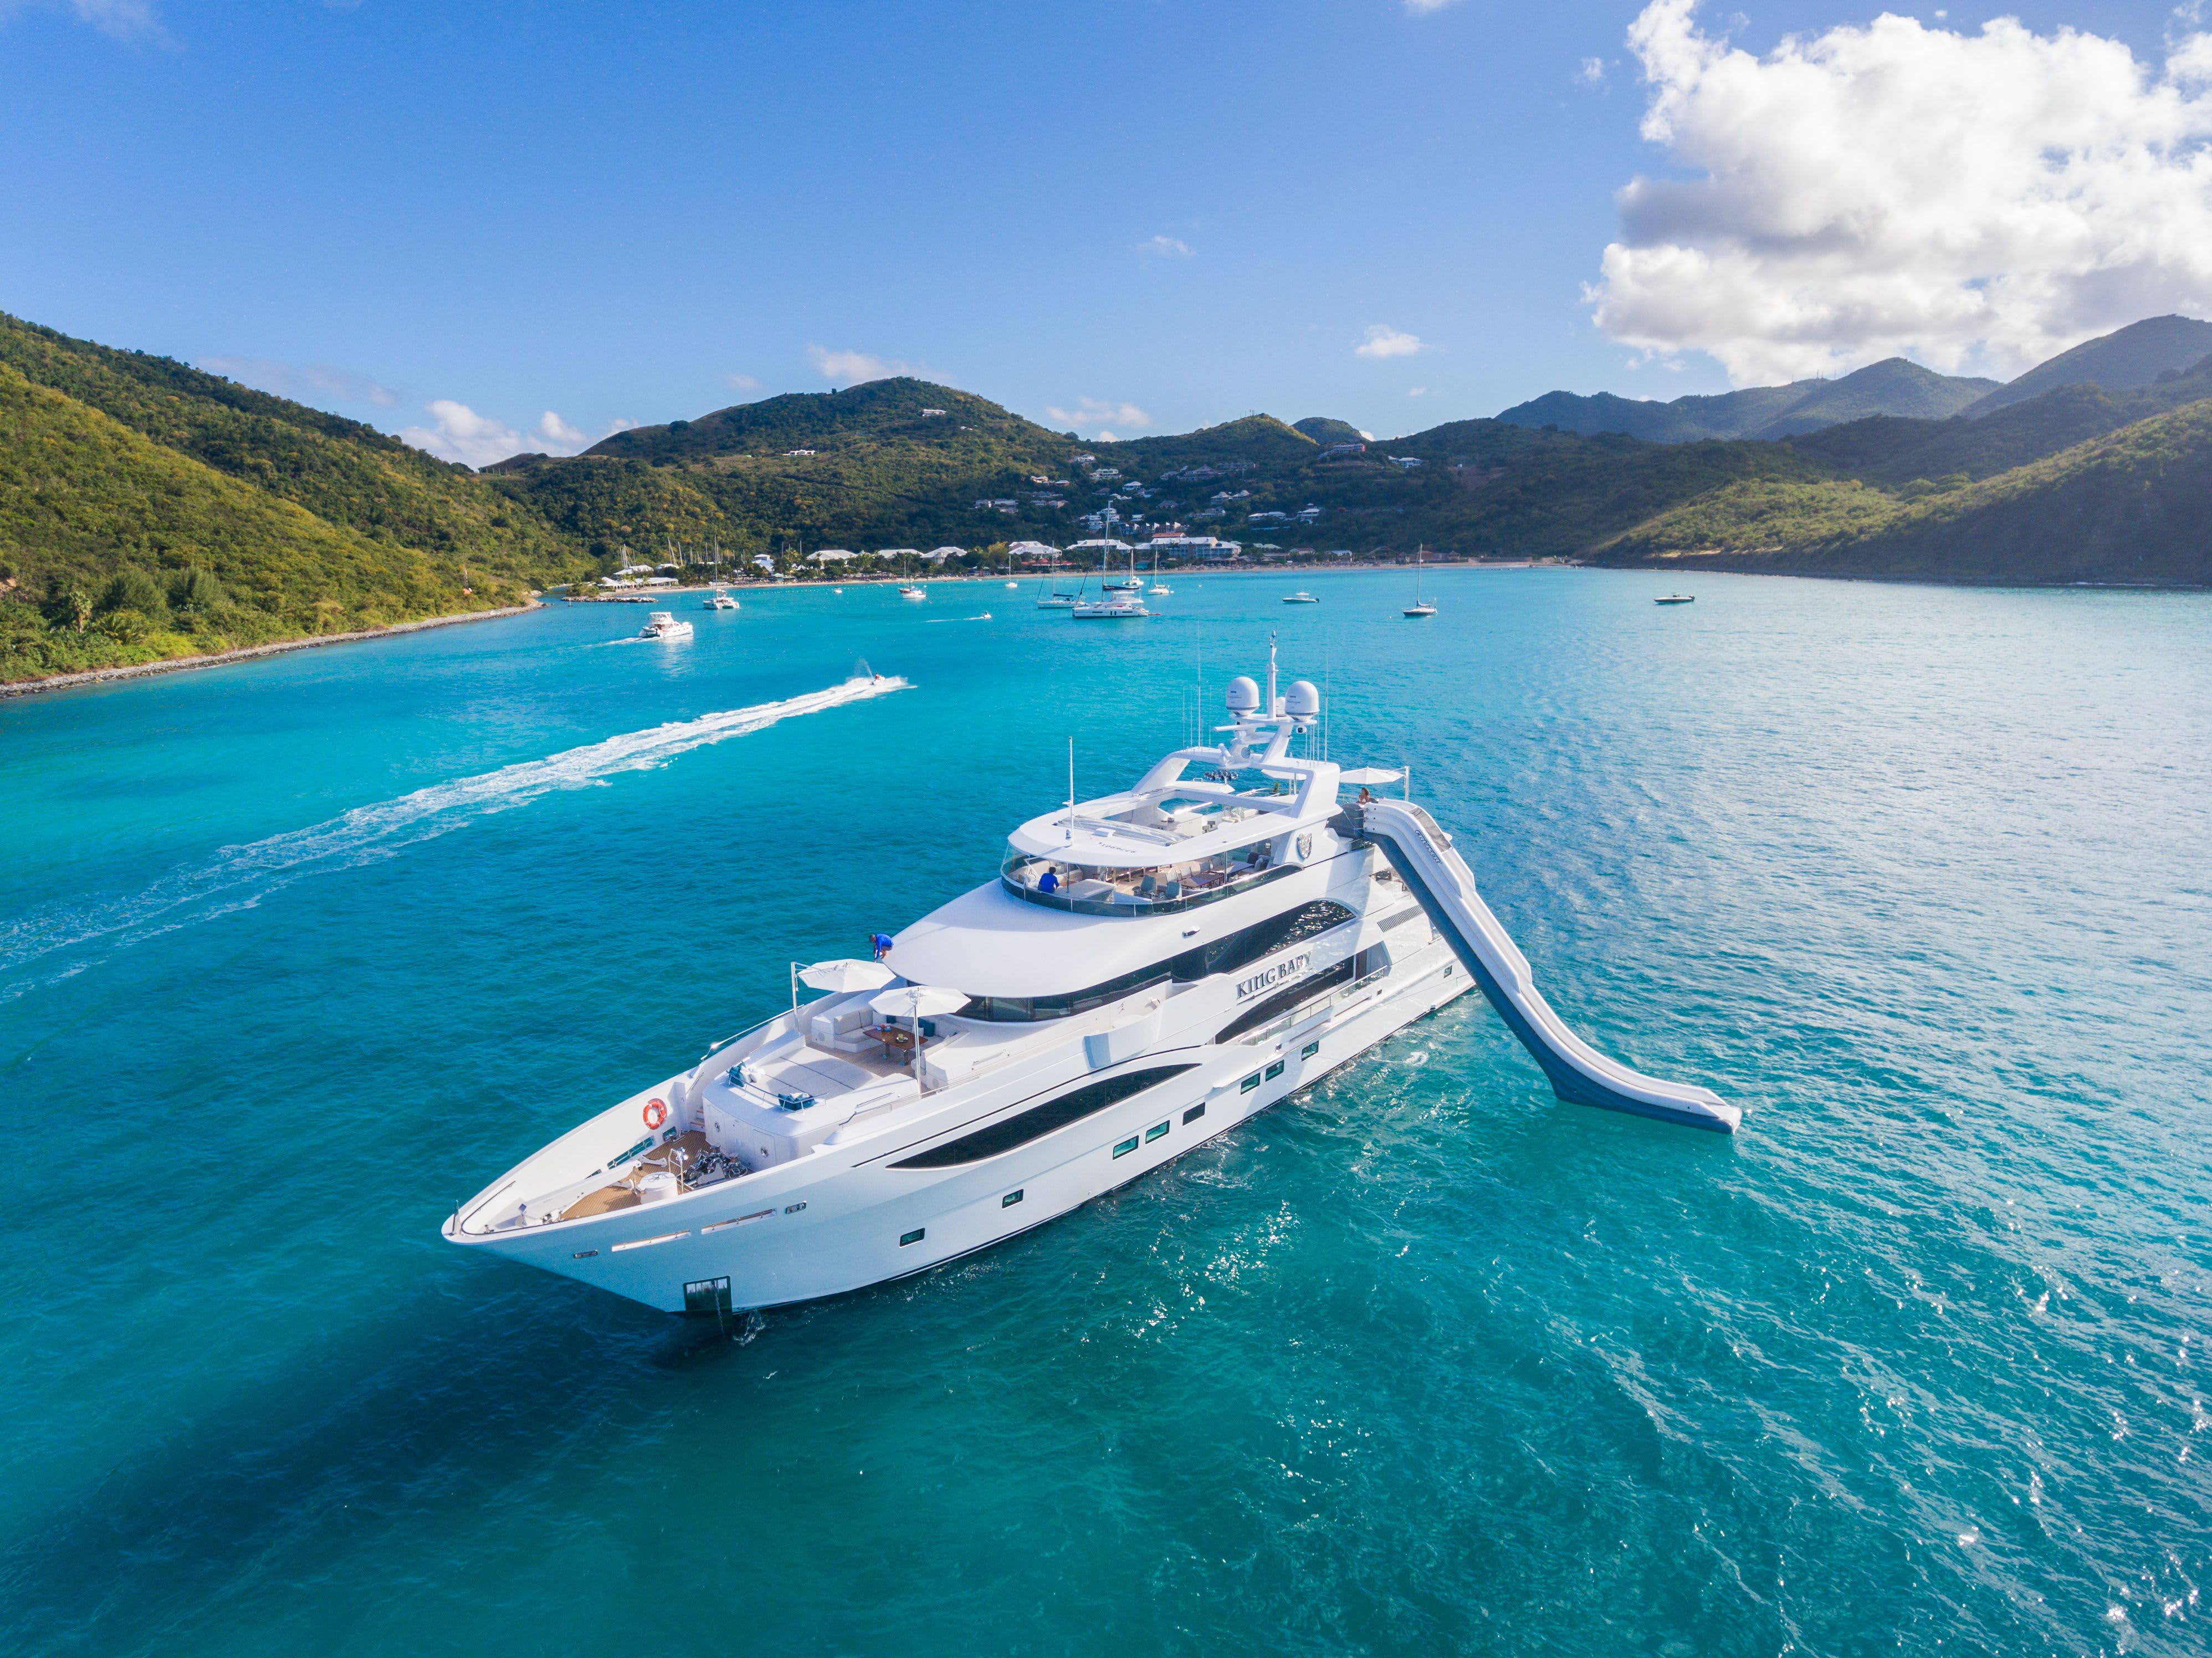 Luxury yacht sales decline as Russian oligarchs exit the market